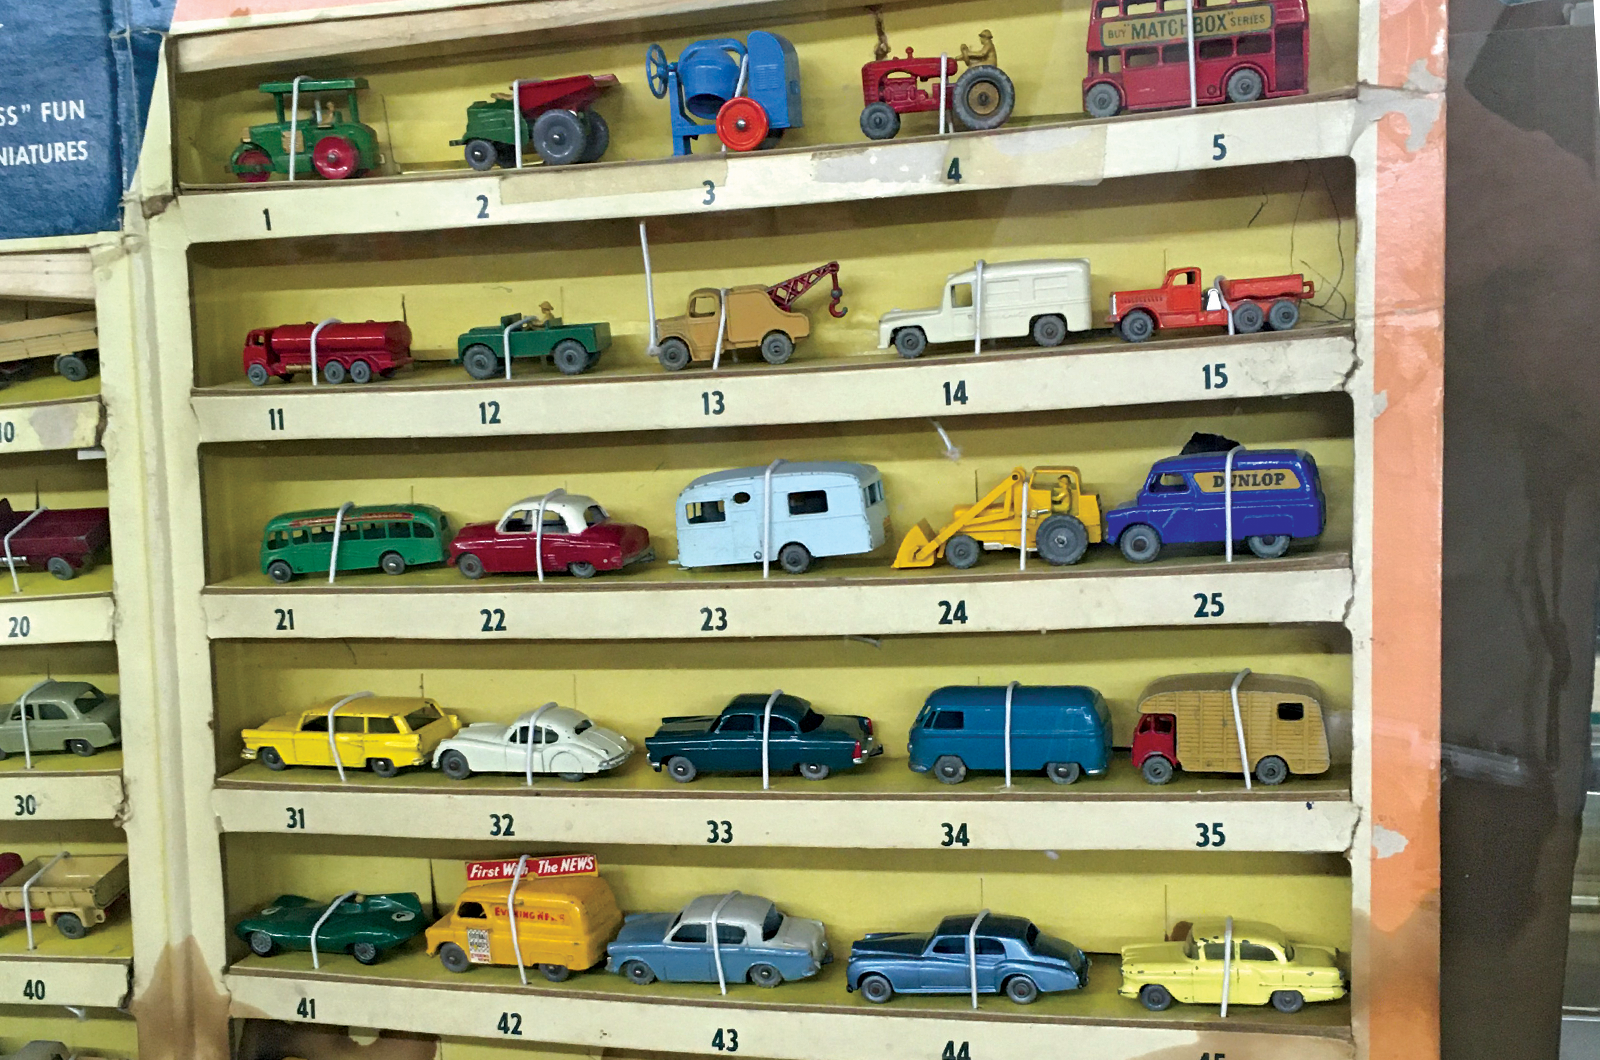 Classic & Sports Car – Also in my garage: classic cars and Matchbox models